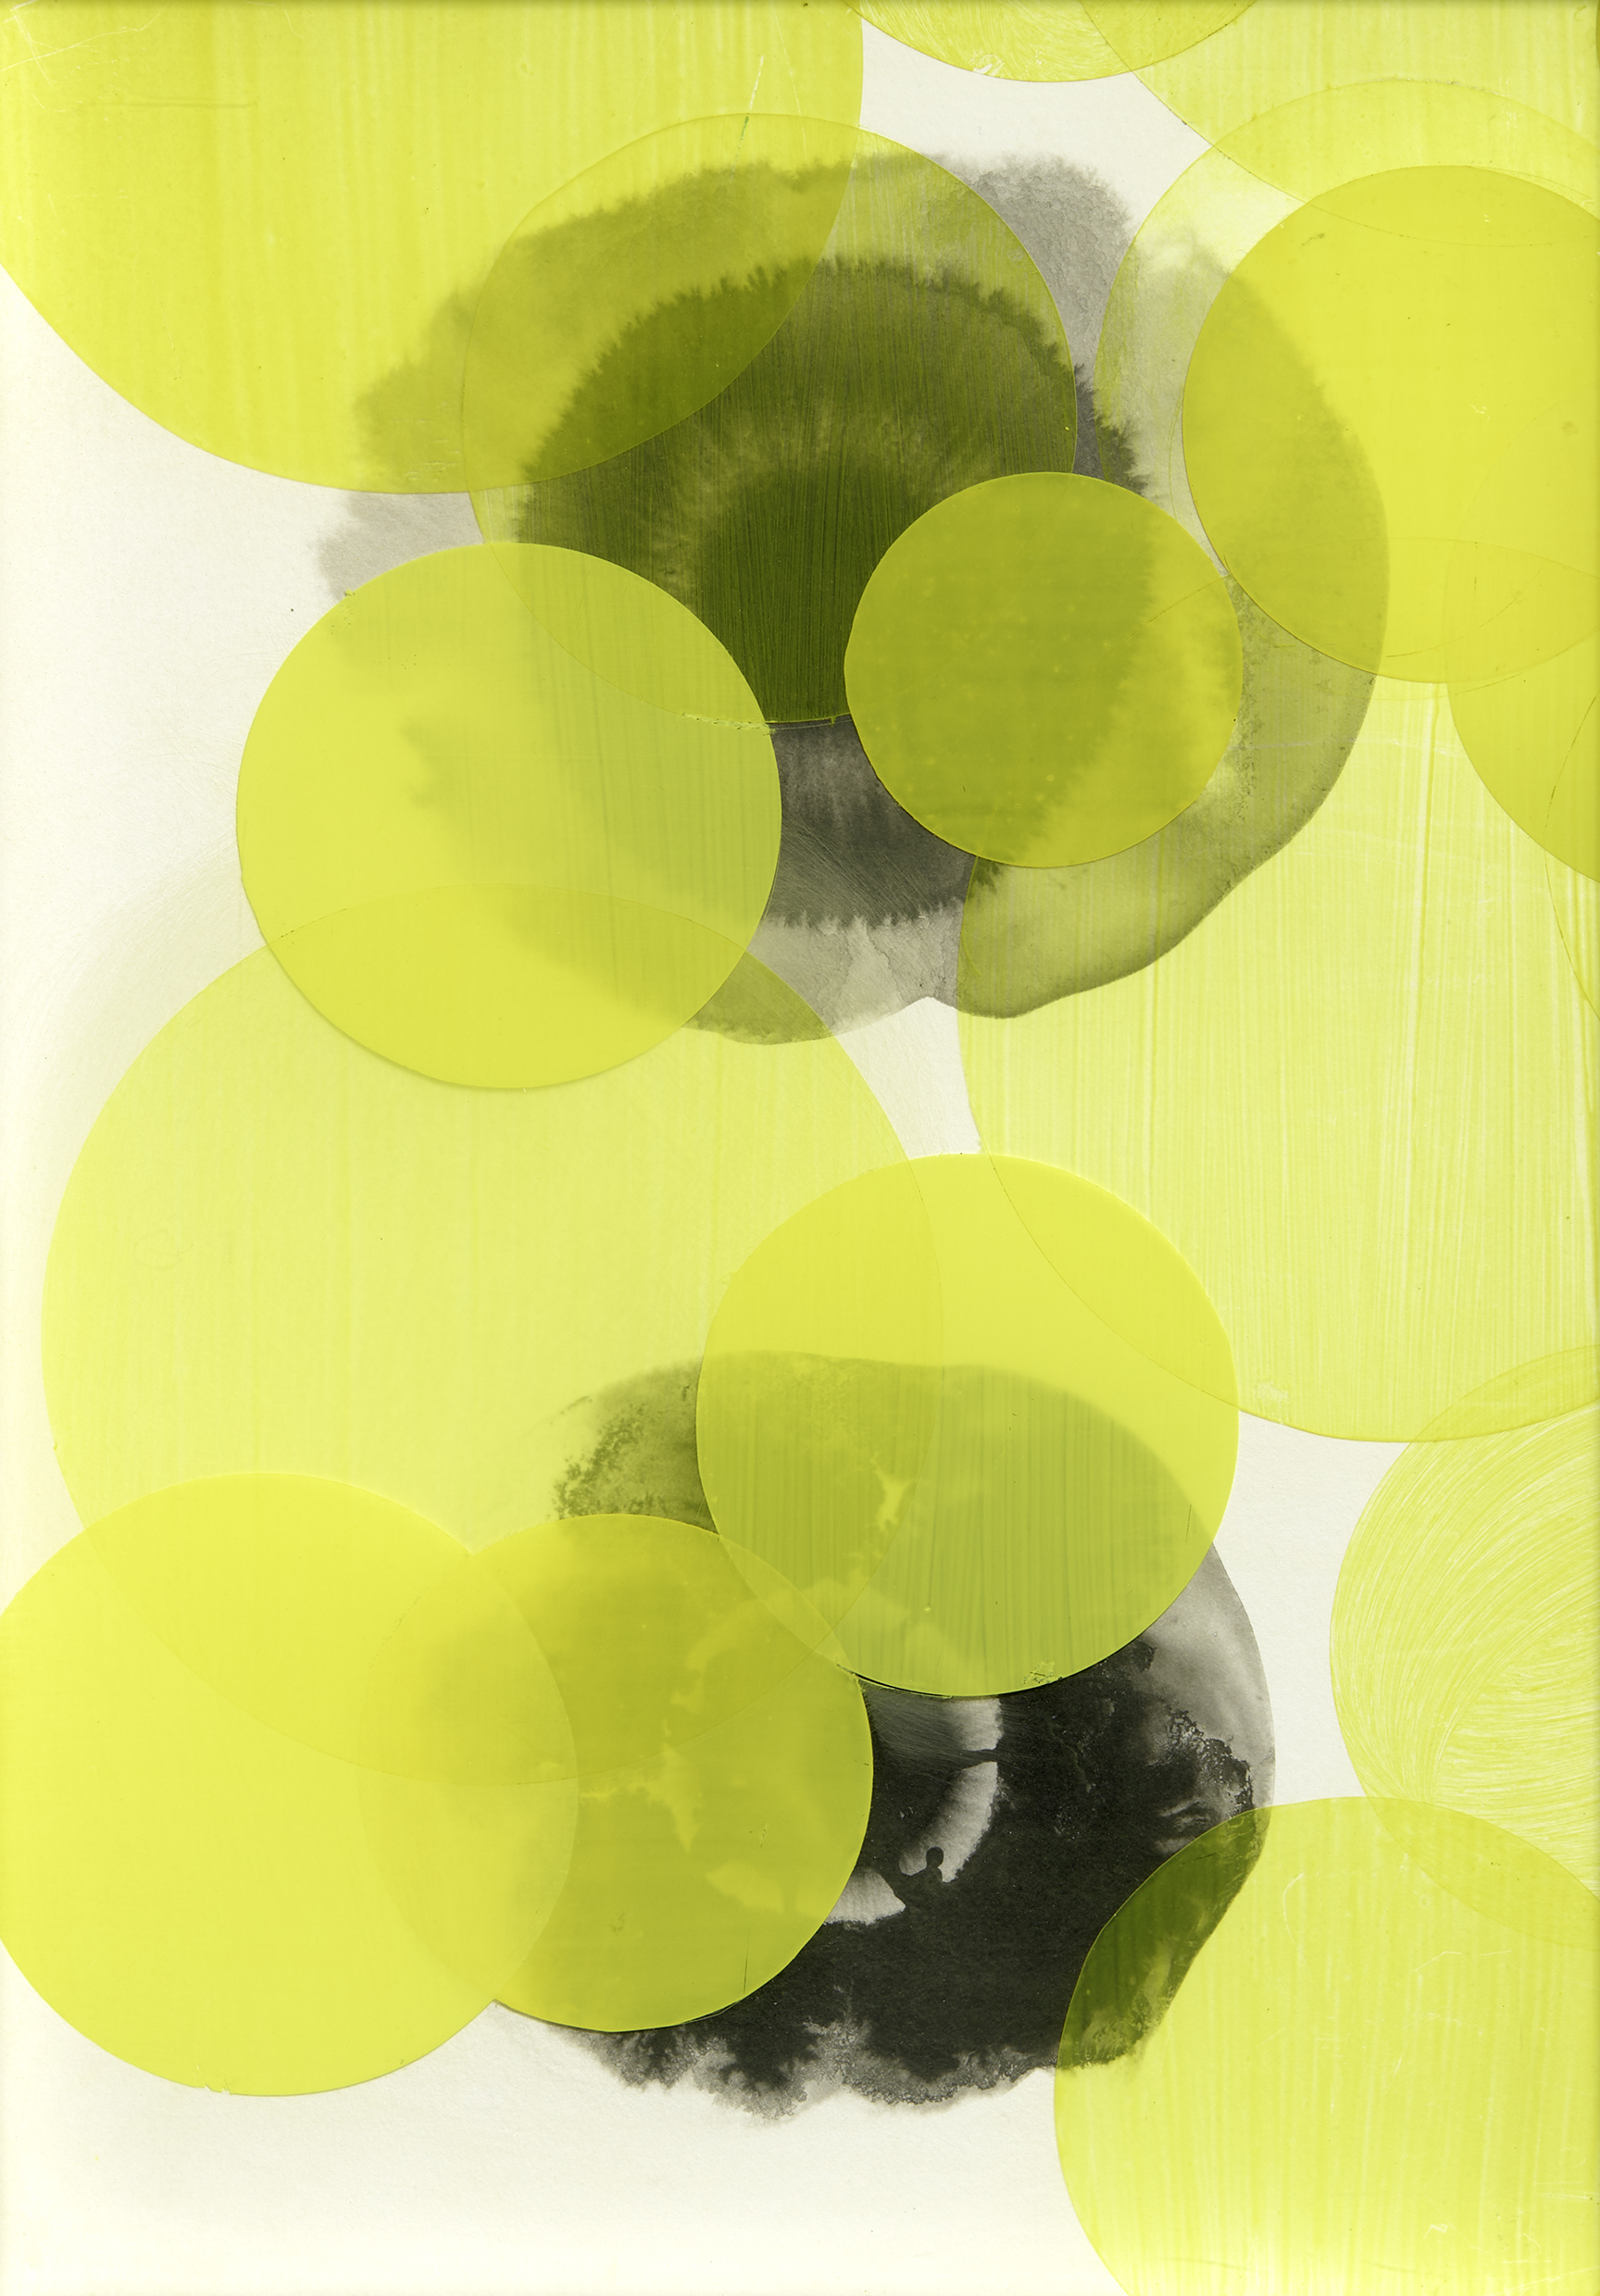 Mark Hislop 'Yellow Vision 1' synthetic polymer paint on mylar, charcoal on paper 48 x 34cm $2,000